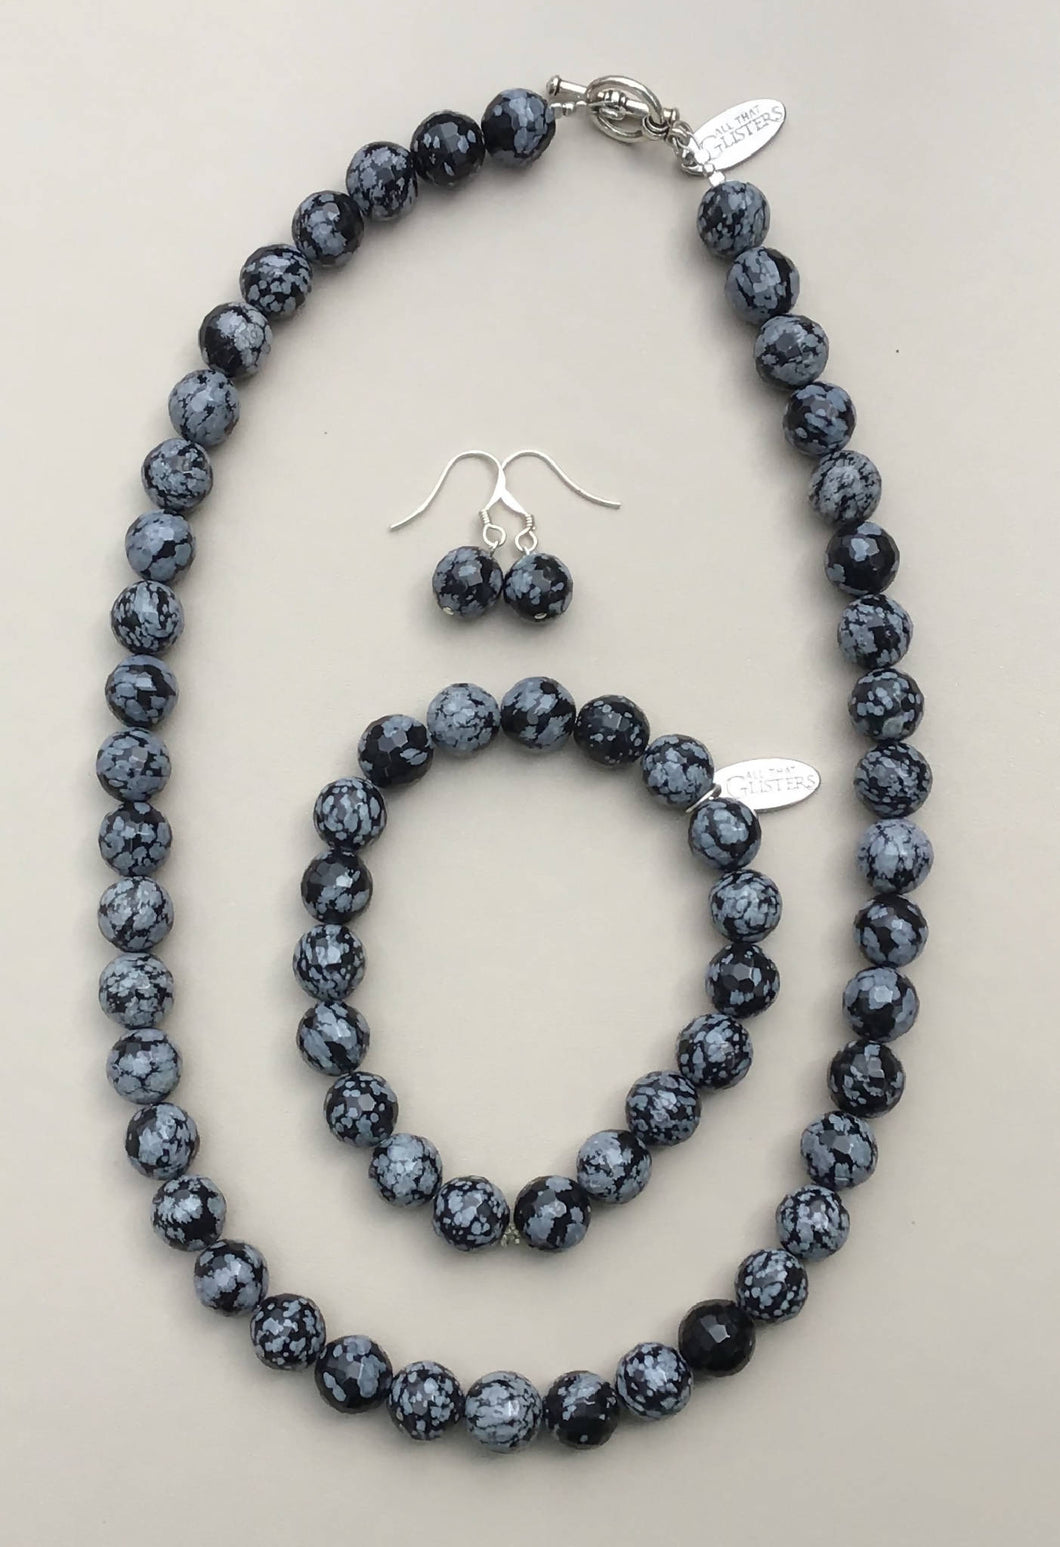 Snowflake Obsidian Necklace, Bracelet and Earrings